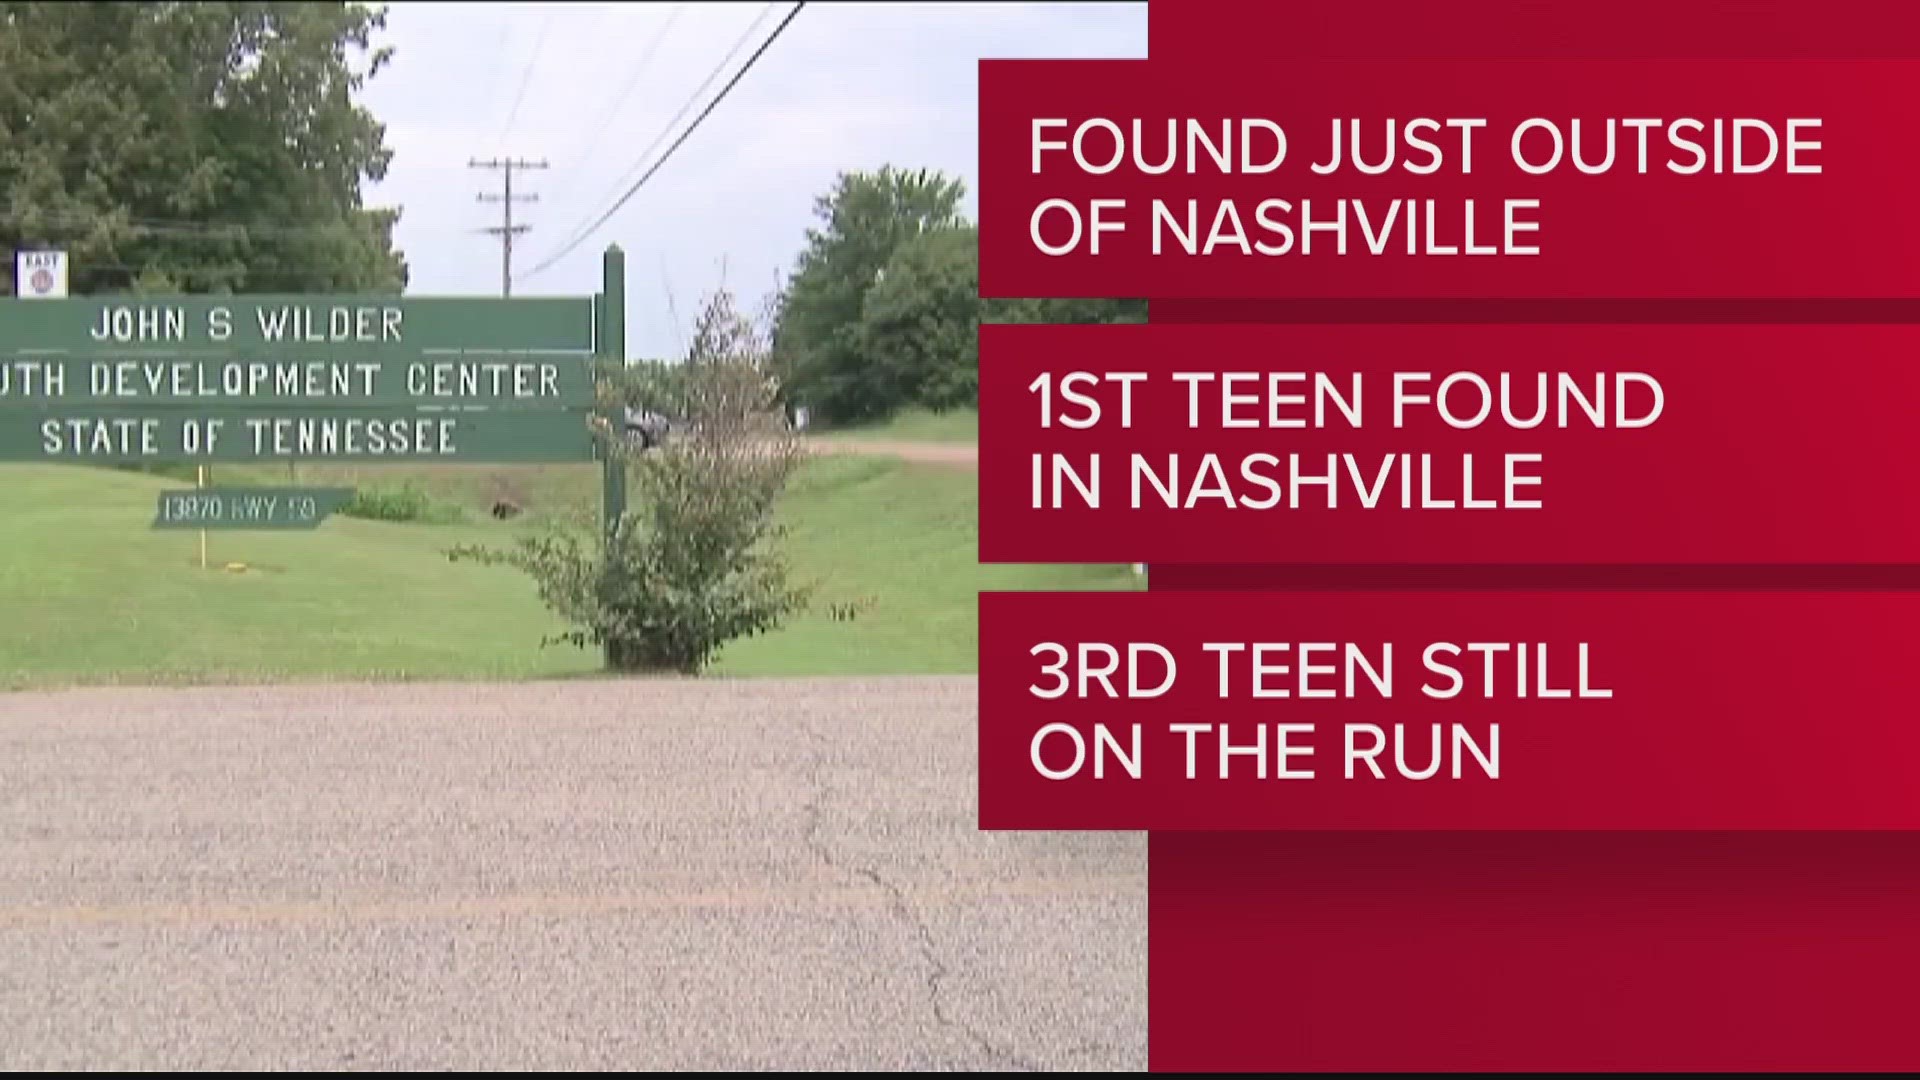 One of the teens was found in Nashville, DCS said, while the second was found in Cheatham County. There's one more teen still at large.